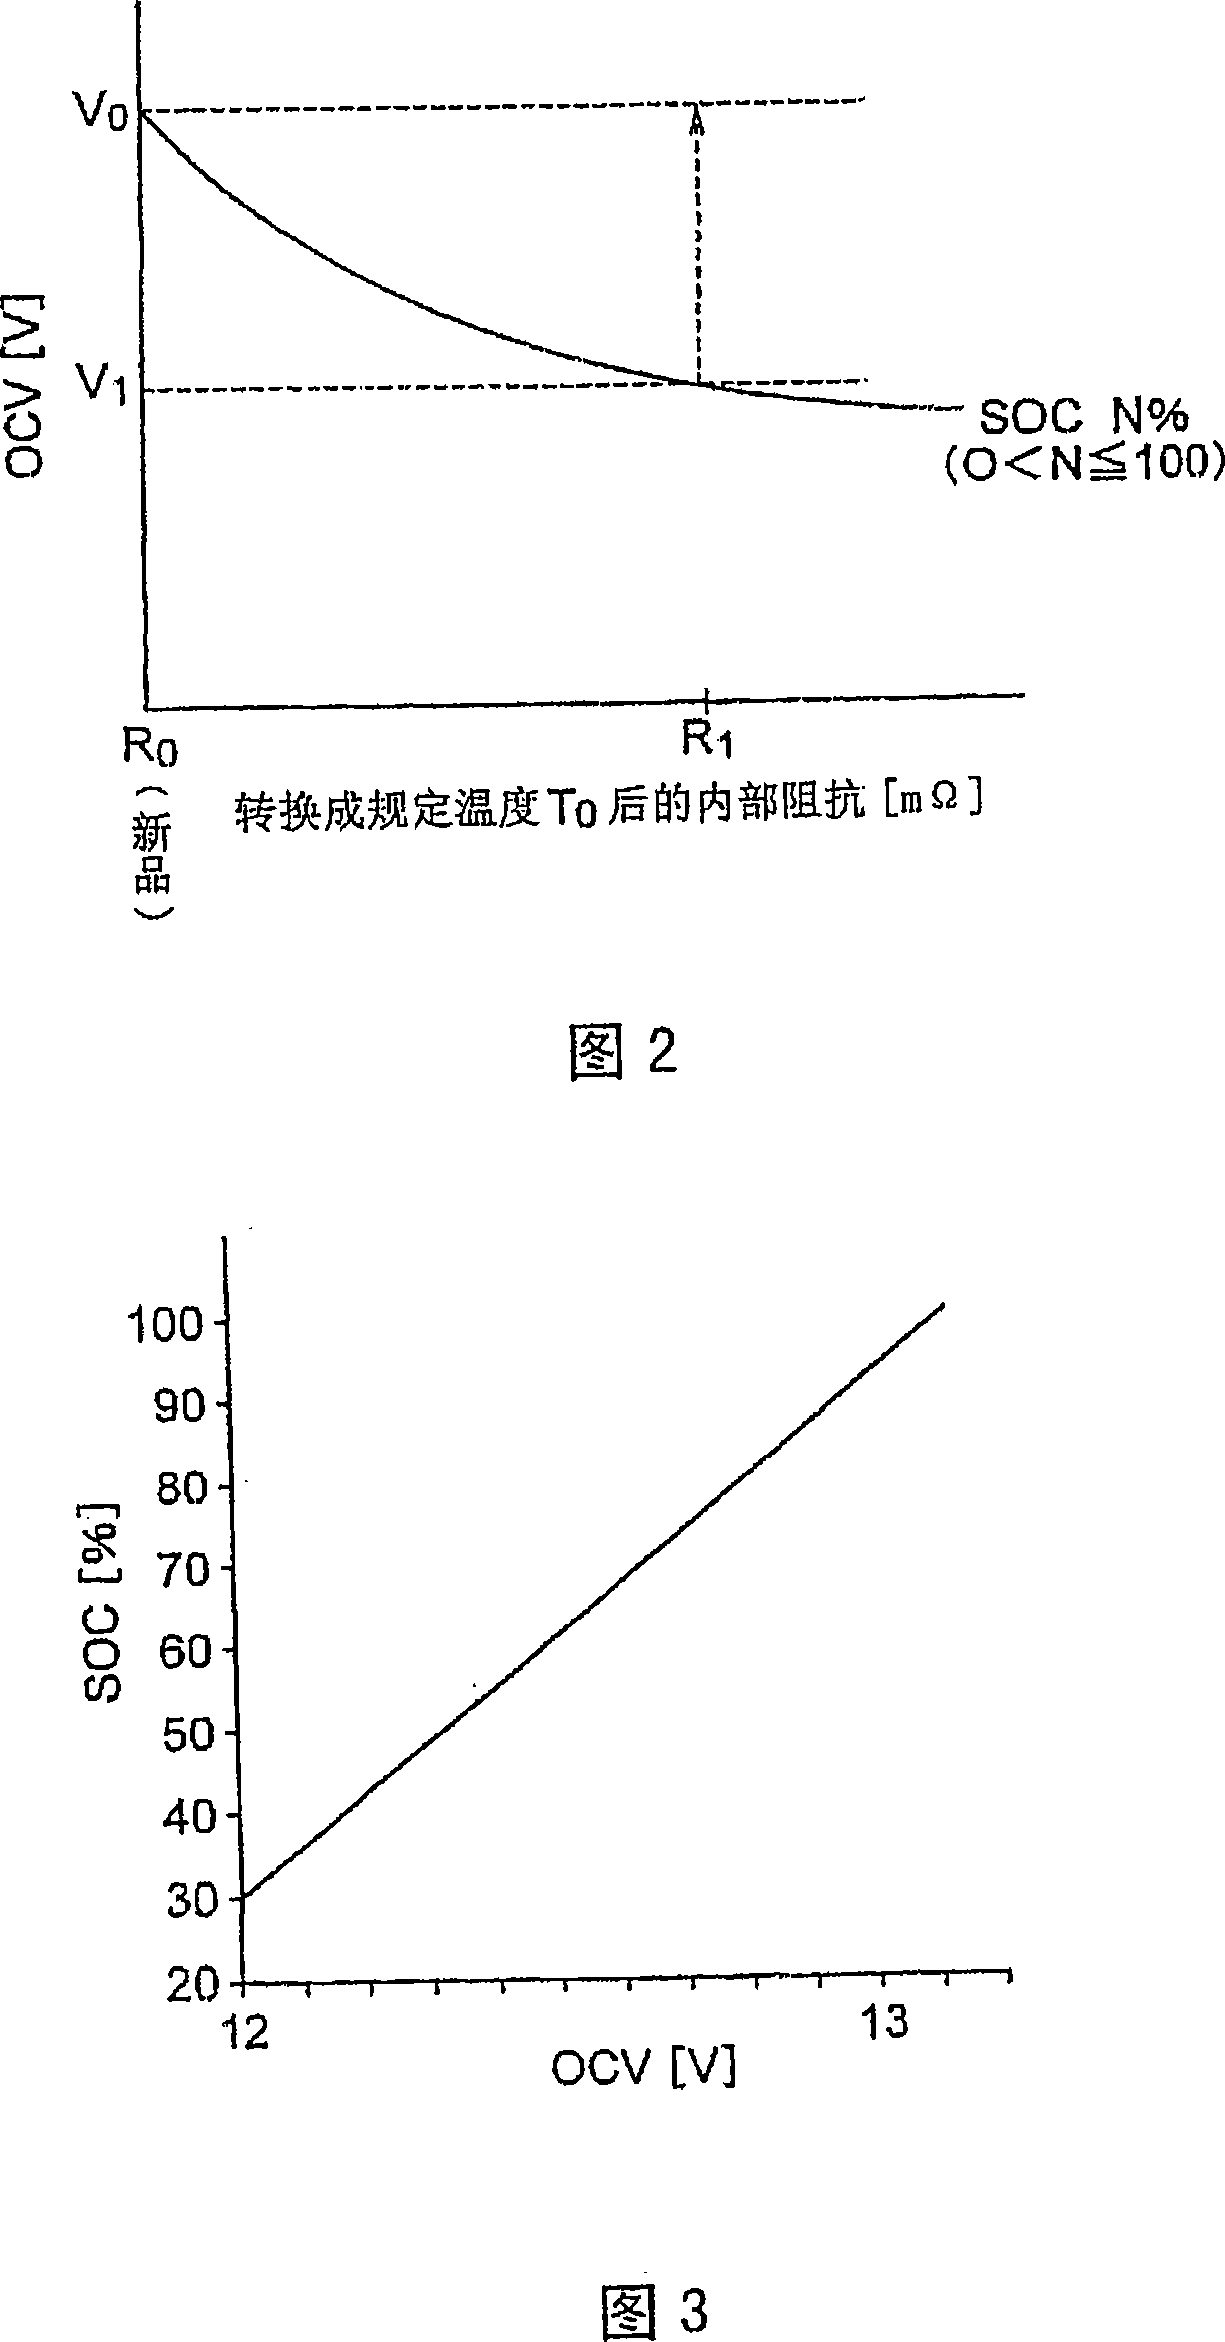 Method and apparatus for determining deterioration of secondary battery, and power supply system therewith